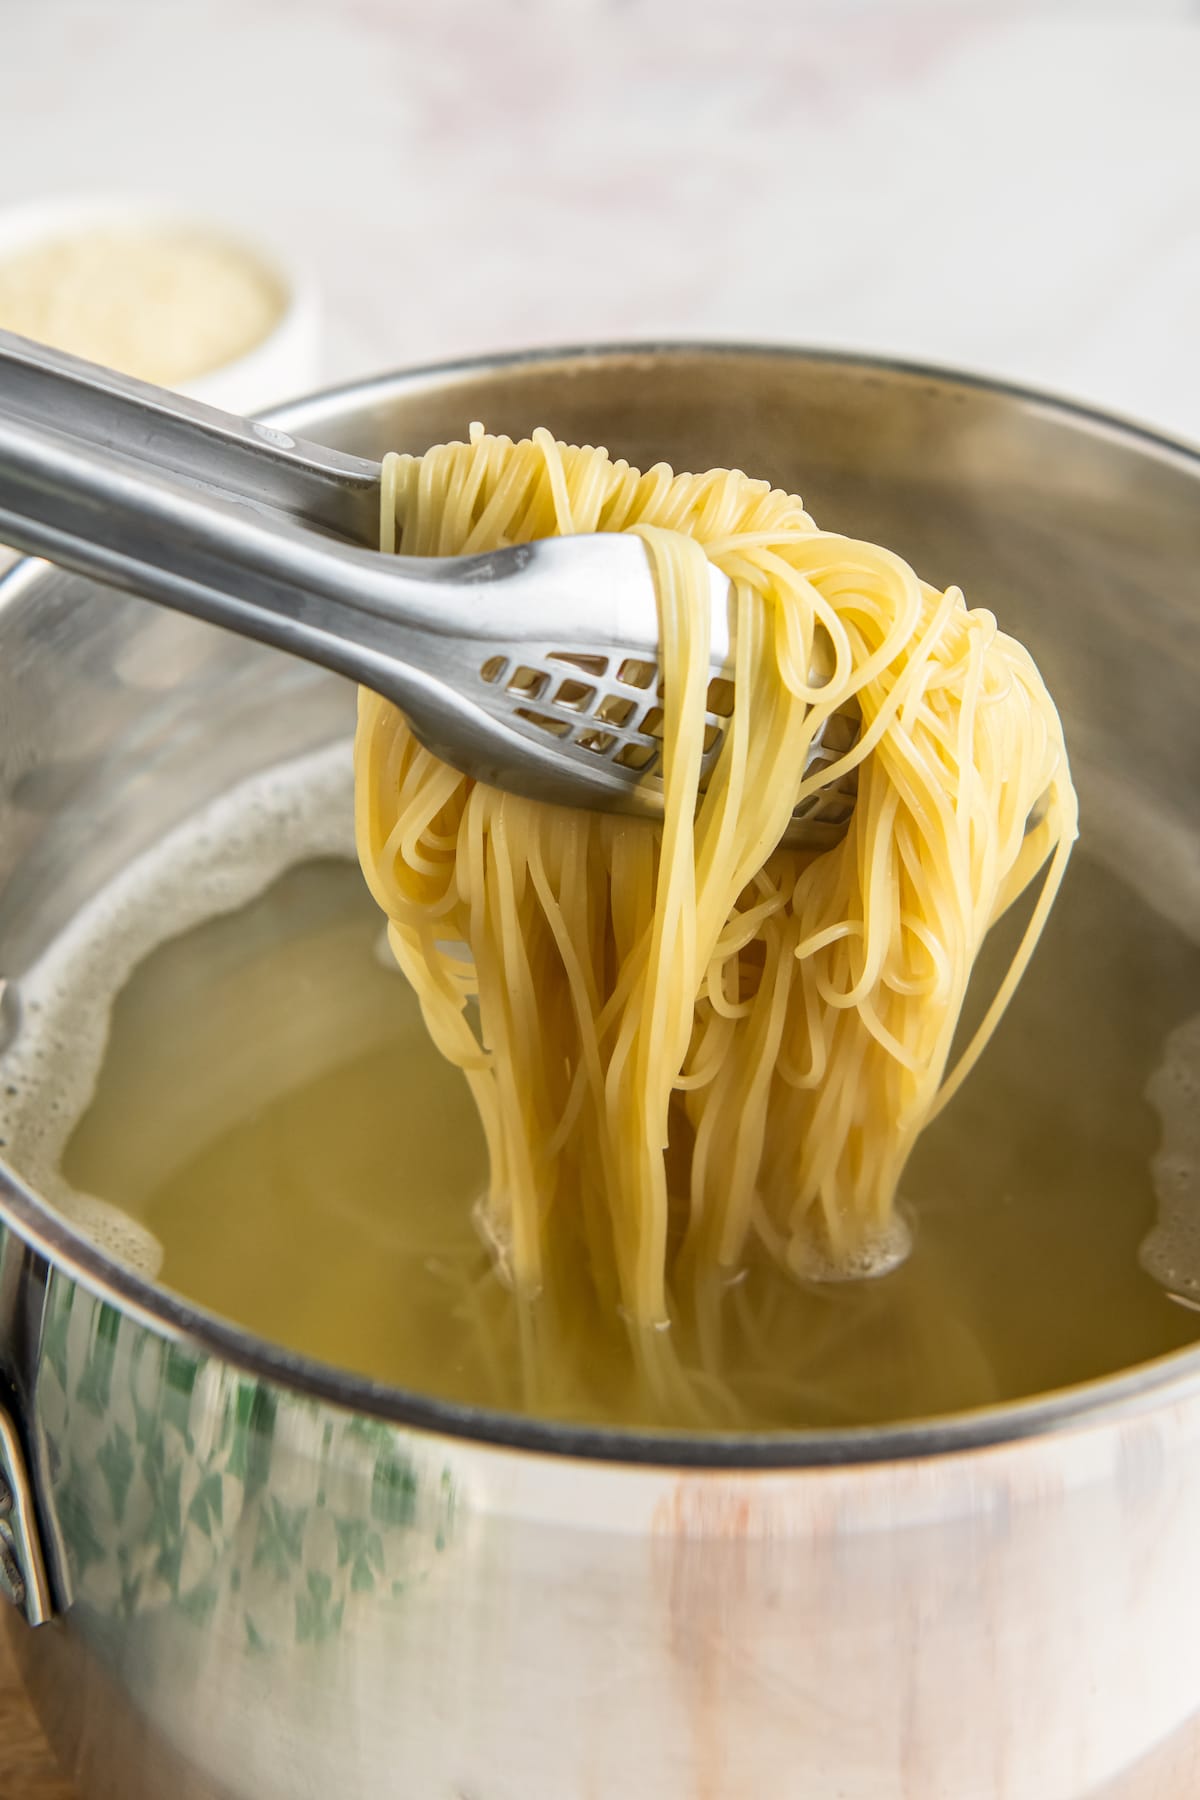 Pasta is lifted out of a pot with tongs.